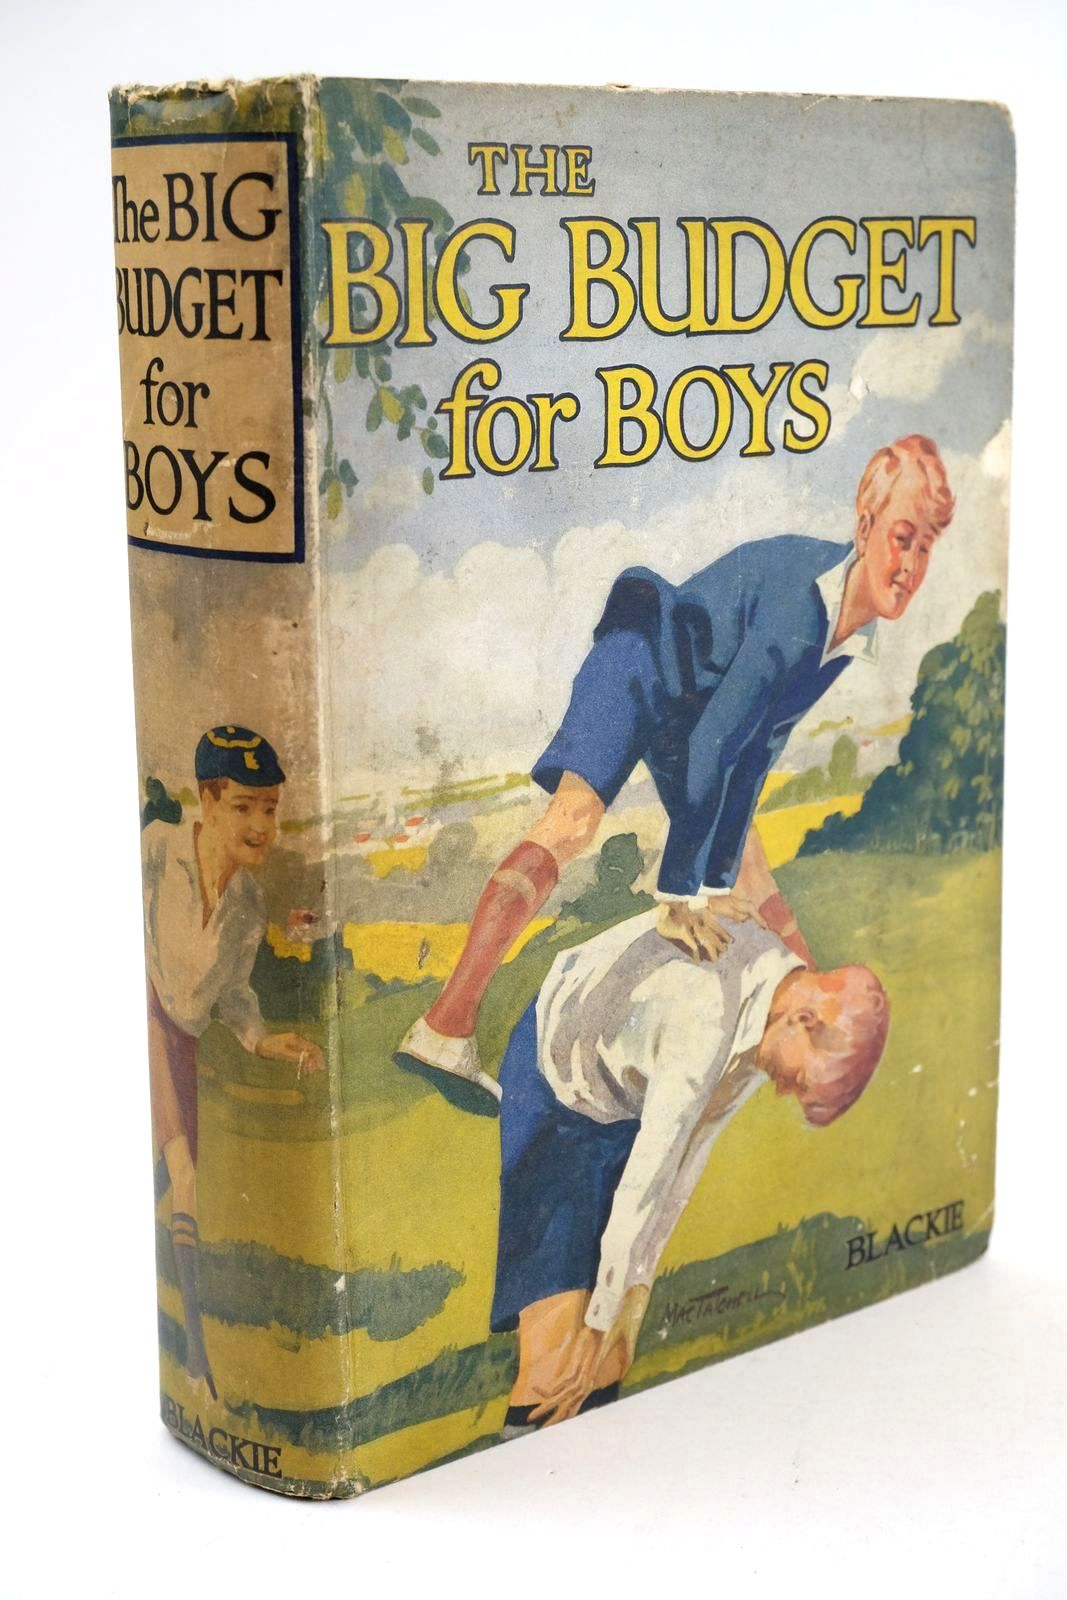 Photo of THE BIG BUDGET FOR BOYS written by Holmes, W.K.
Coales, K. Wallis
Havilton, Jeffrey
et al, 
Westerman, Percy F. illustrated by Lumley, Savile
Wigfull, W. Edward
Prater, Ernest
Brock, R.H.
et al.,  published by Blackie & Son Ltd. (STOCK CODE: 1325135)  for sale by Stella & Rose's Books